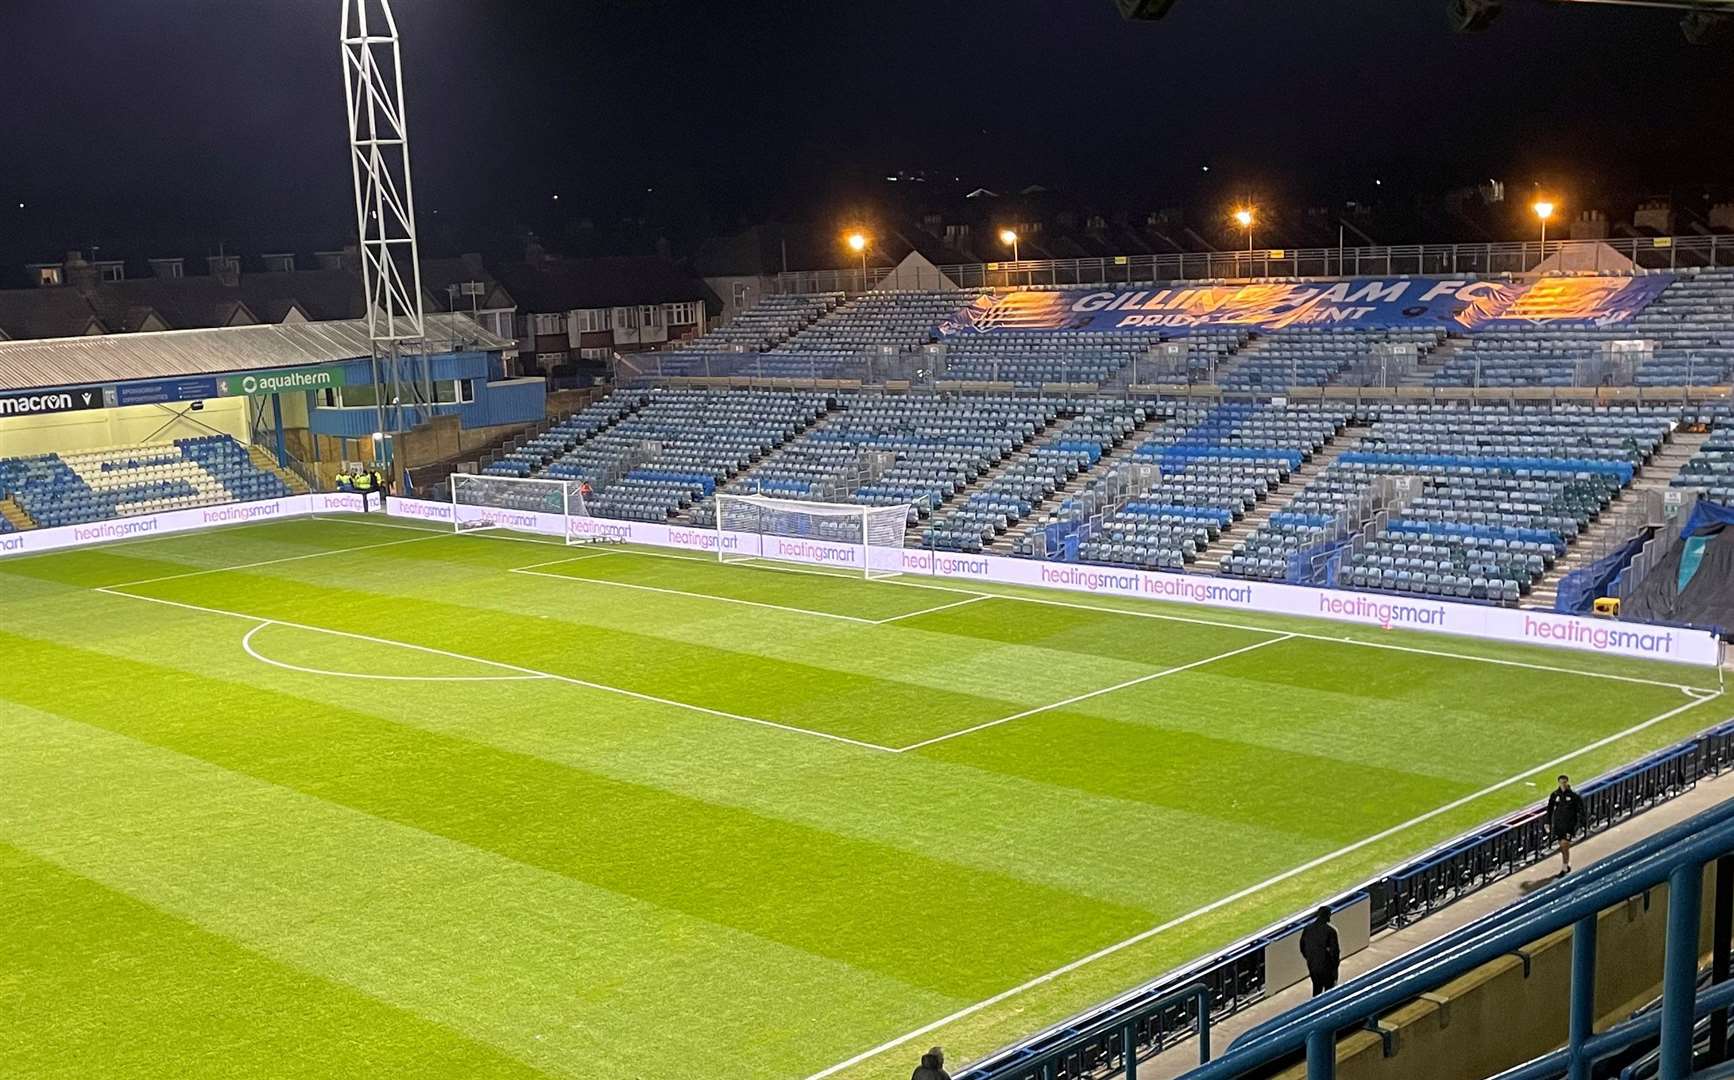 Gillingham's 'Town End' at Priestfield wll be packed on Saturday after Charlton sold out their ticket allocation for the FA Cup fixture